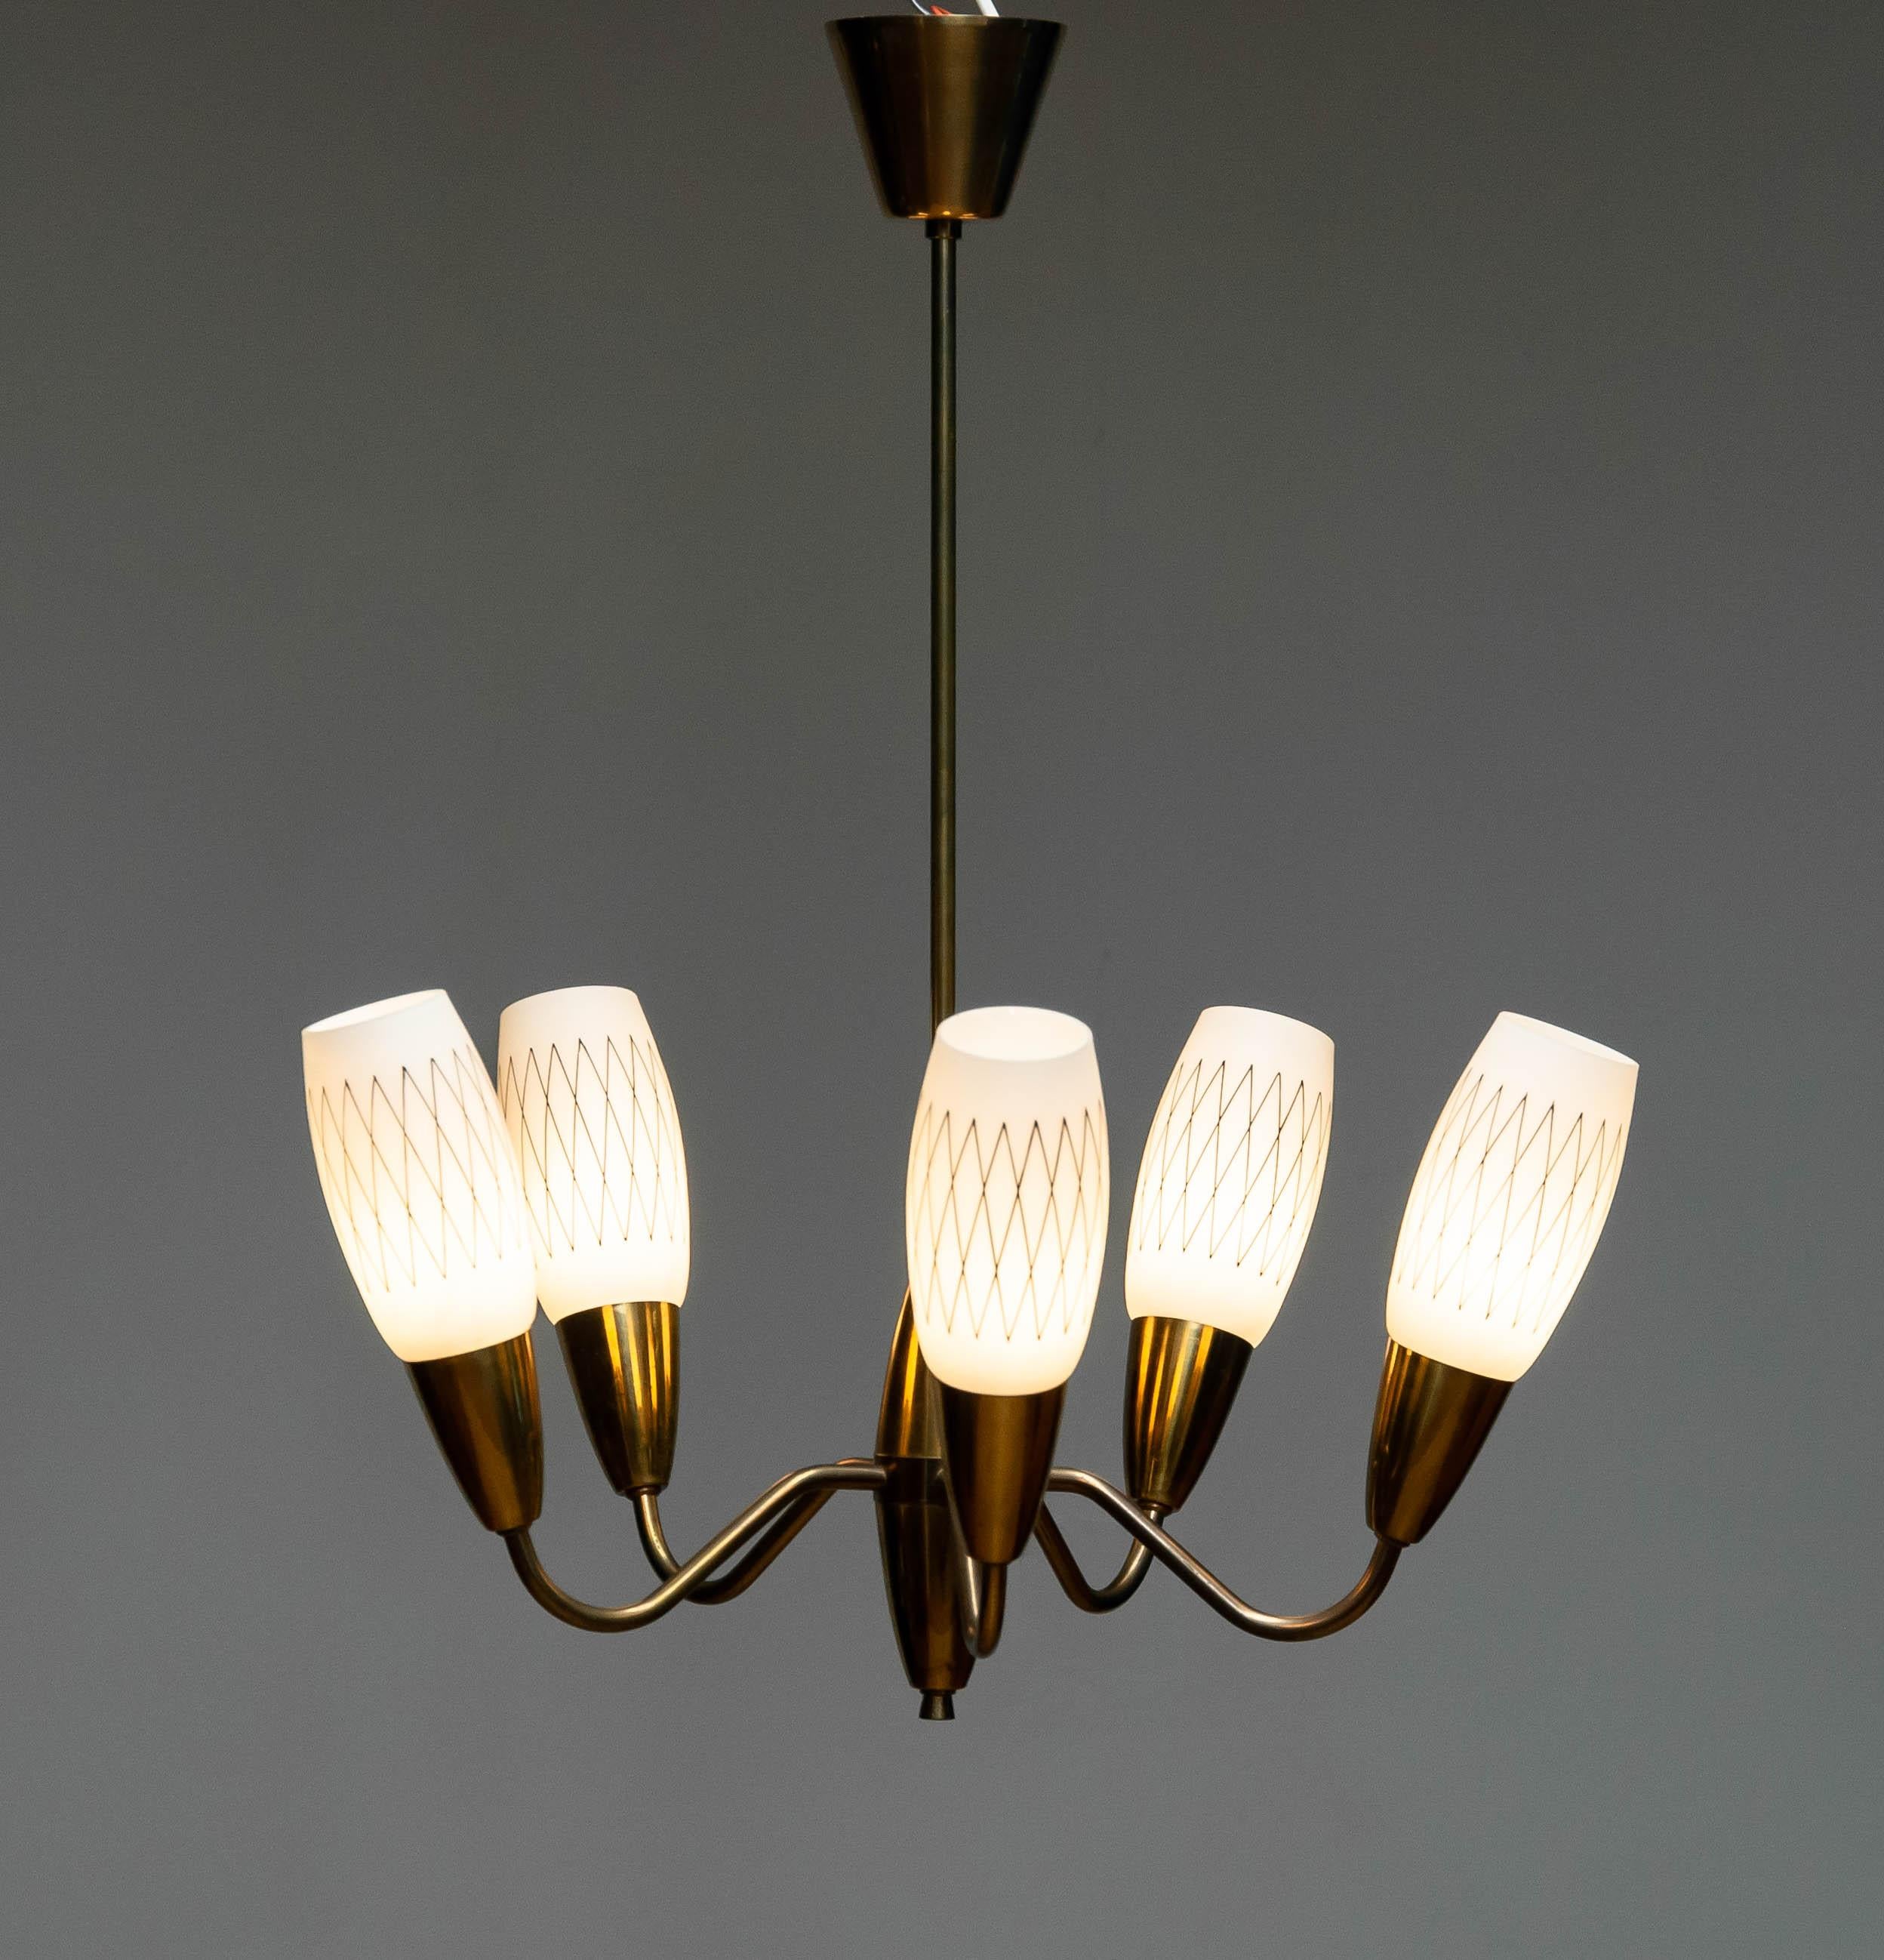 Mid-Century Modern Elegant Swedish Pendant / Chandelier In Brass And Opal Art Glass From The 1950s  For Sale